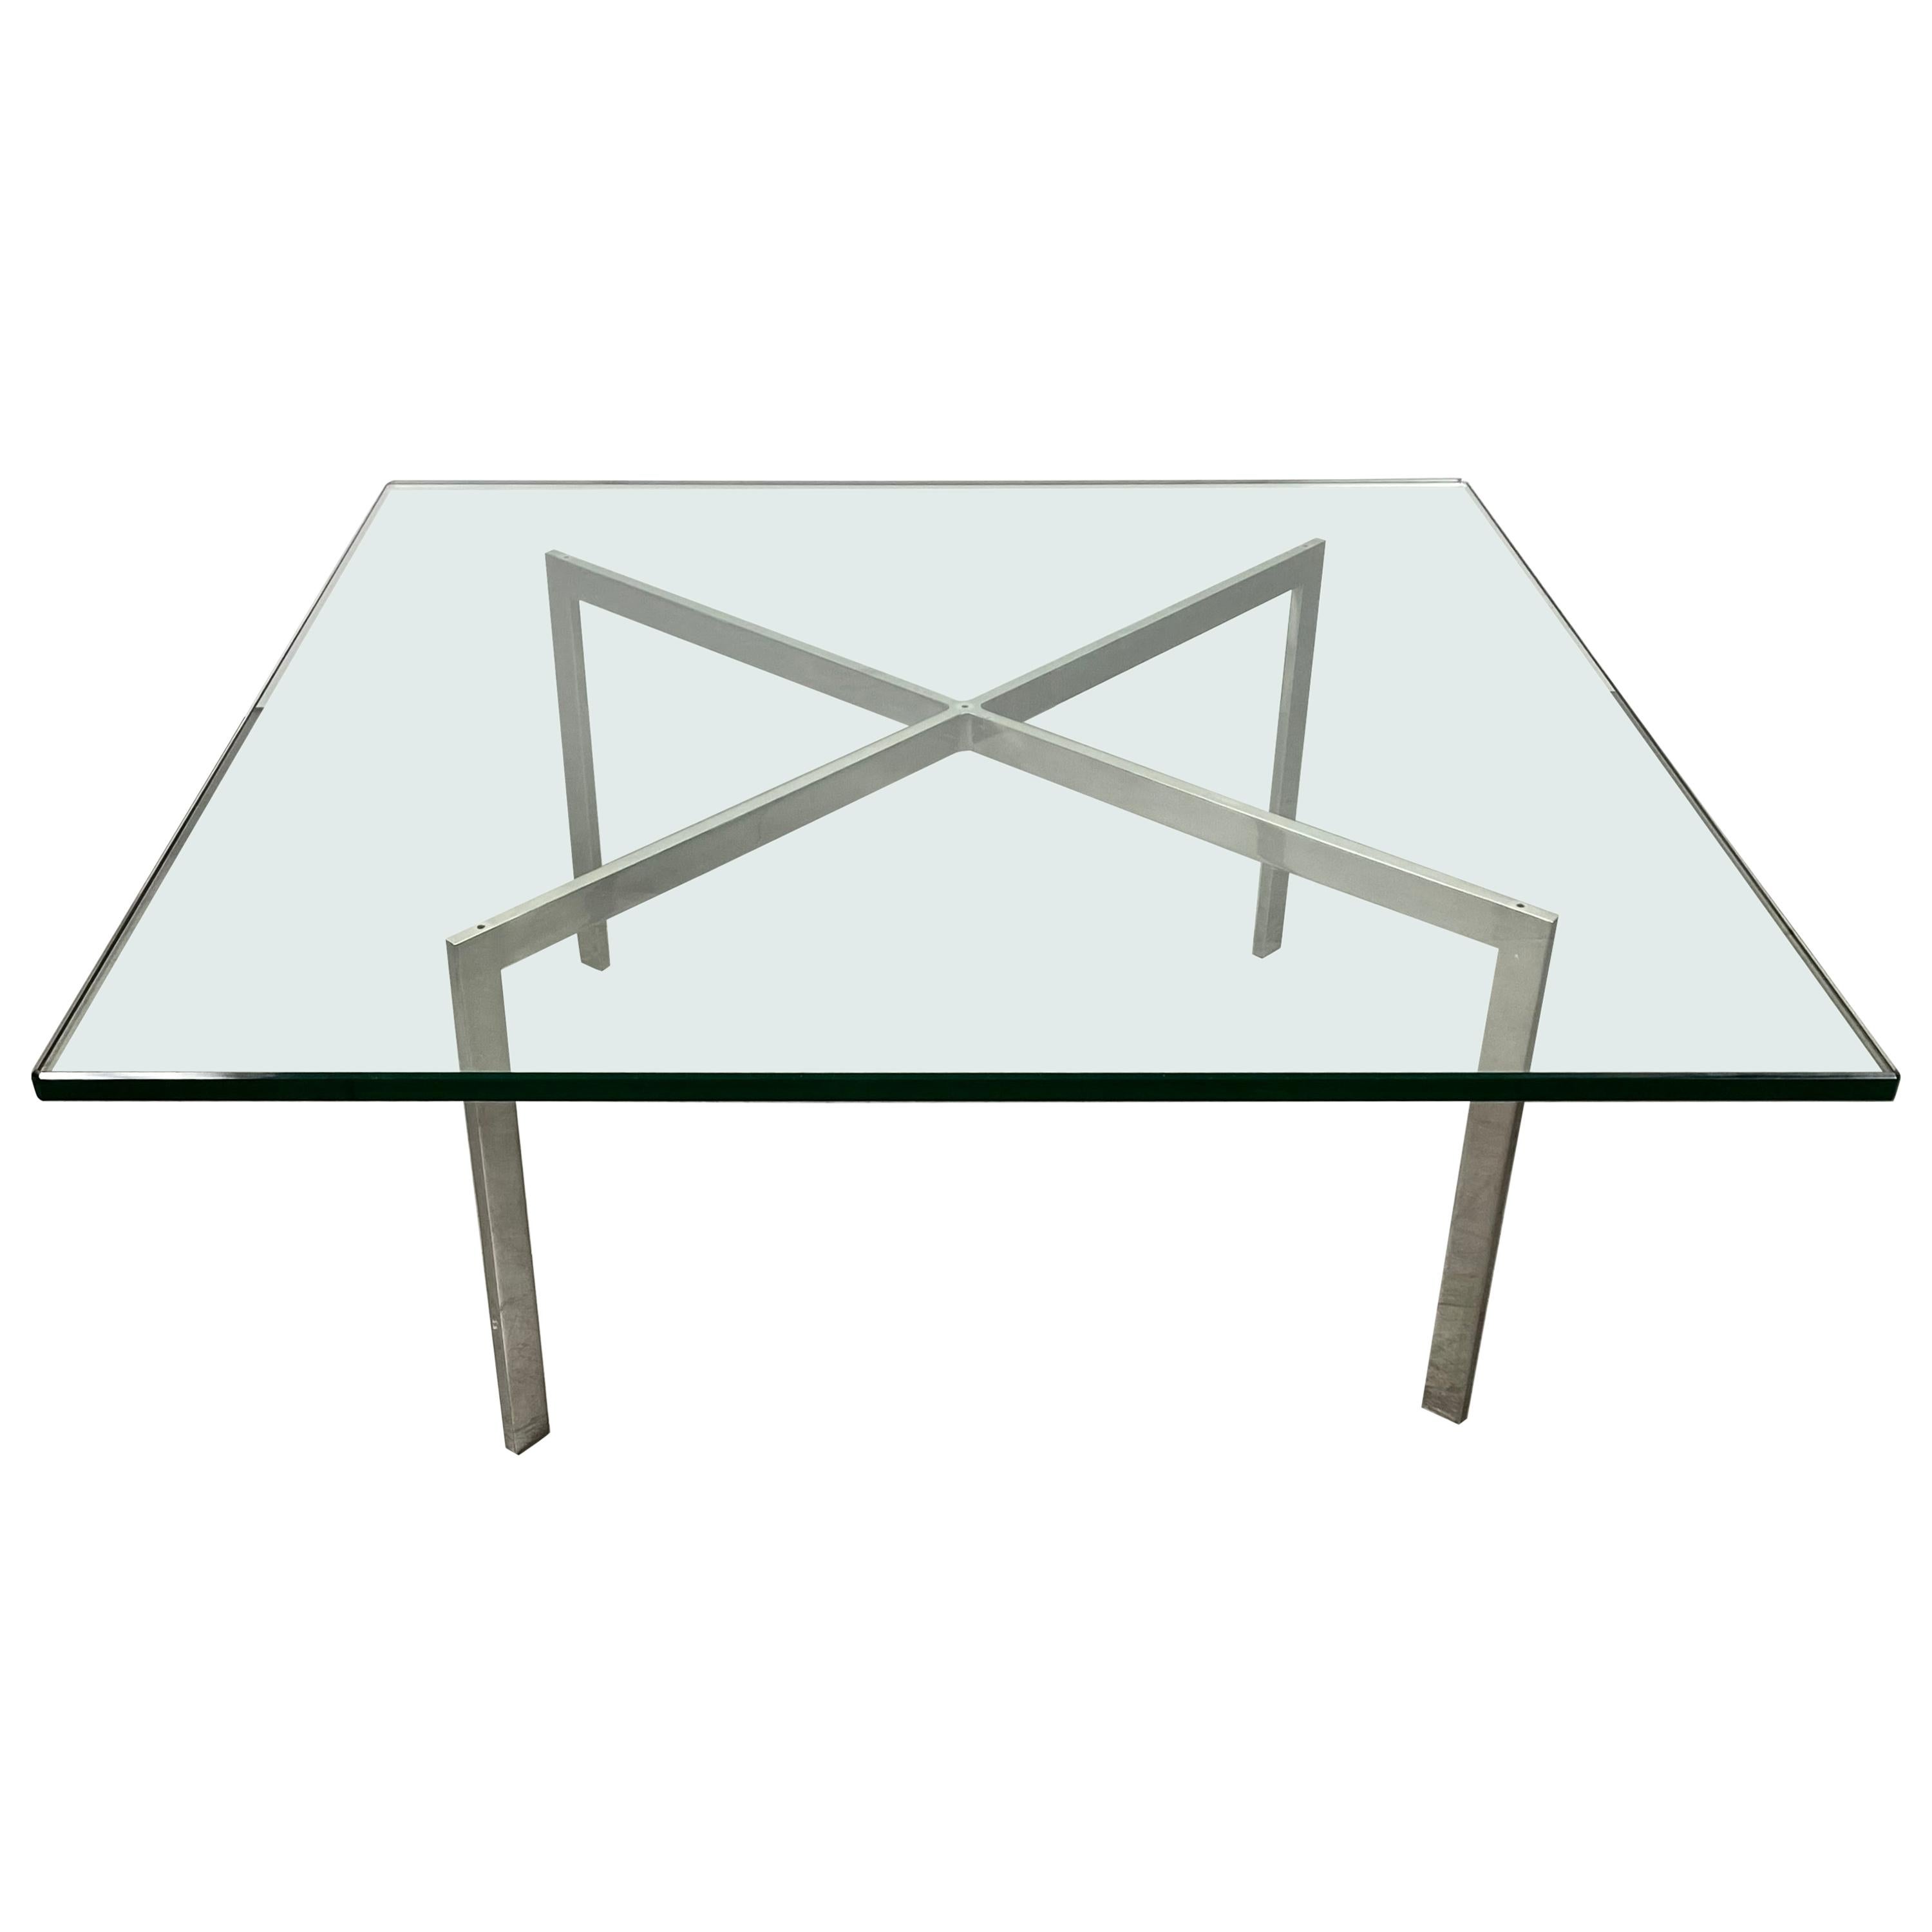 Mies Van Der Rohe Label Stamped Barcelona Table, Knoll Products, circa 1970s